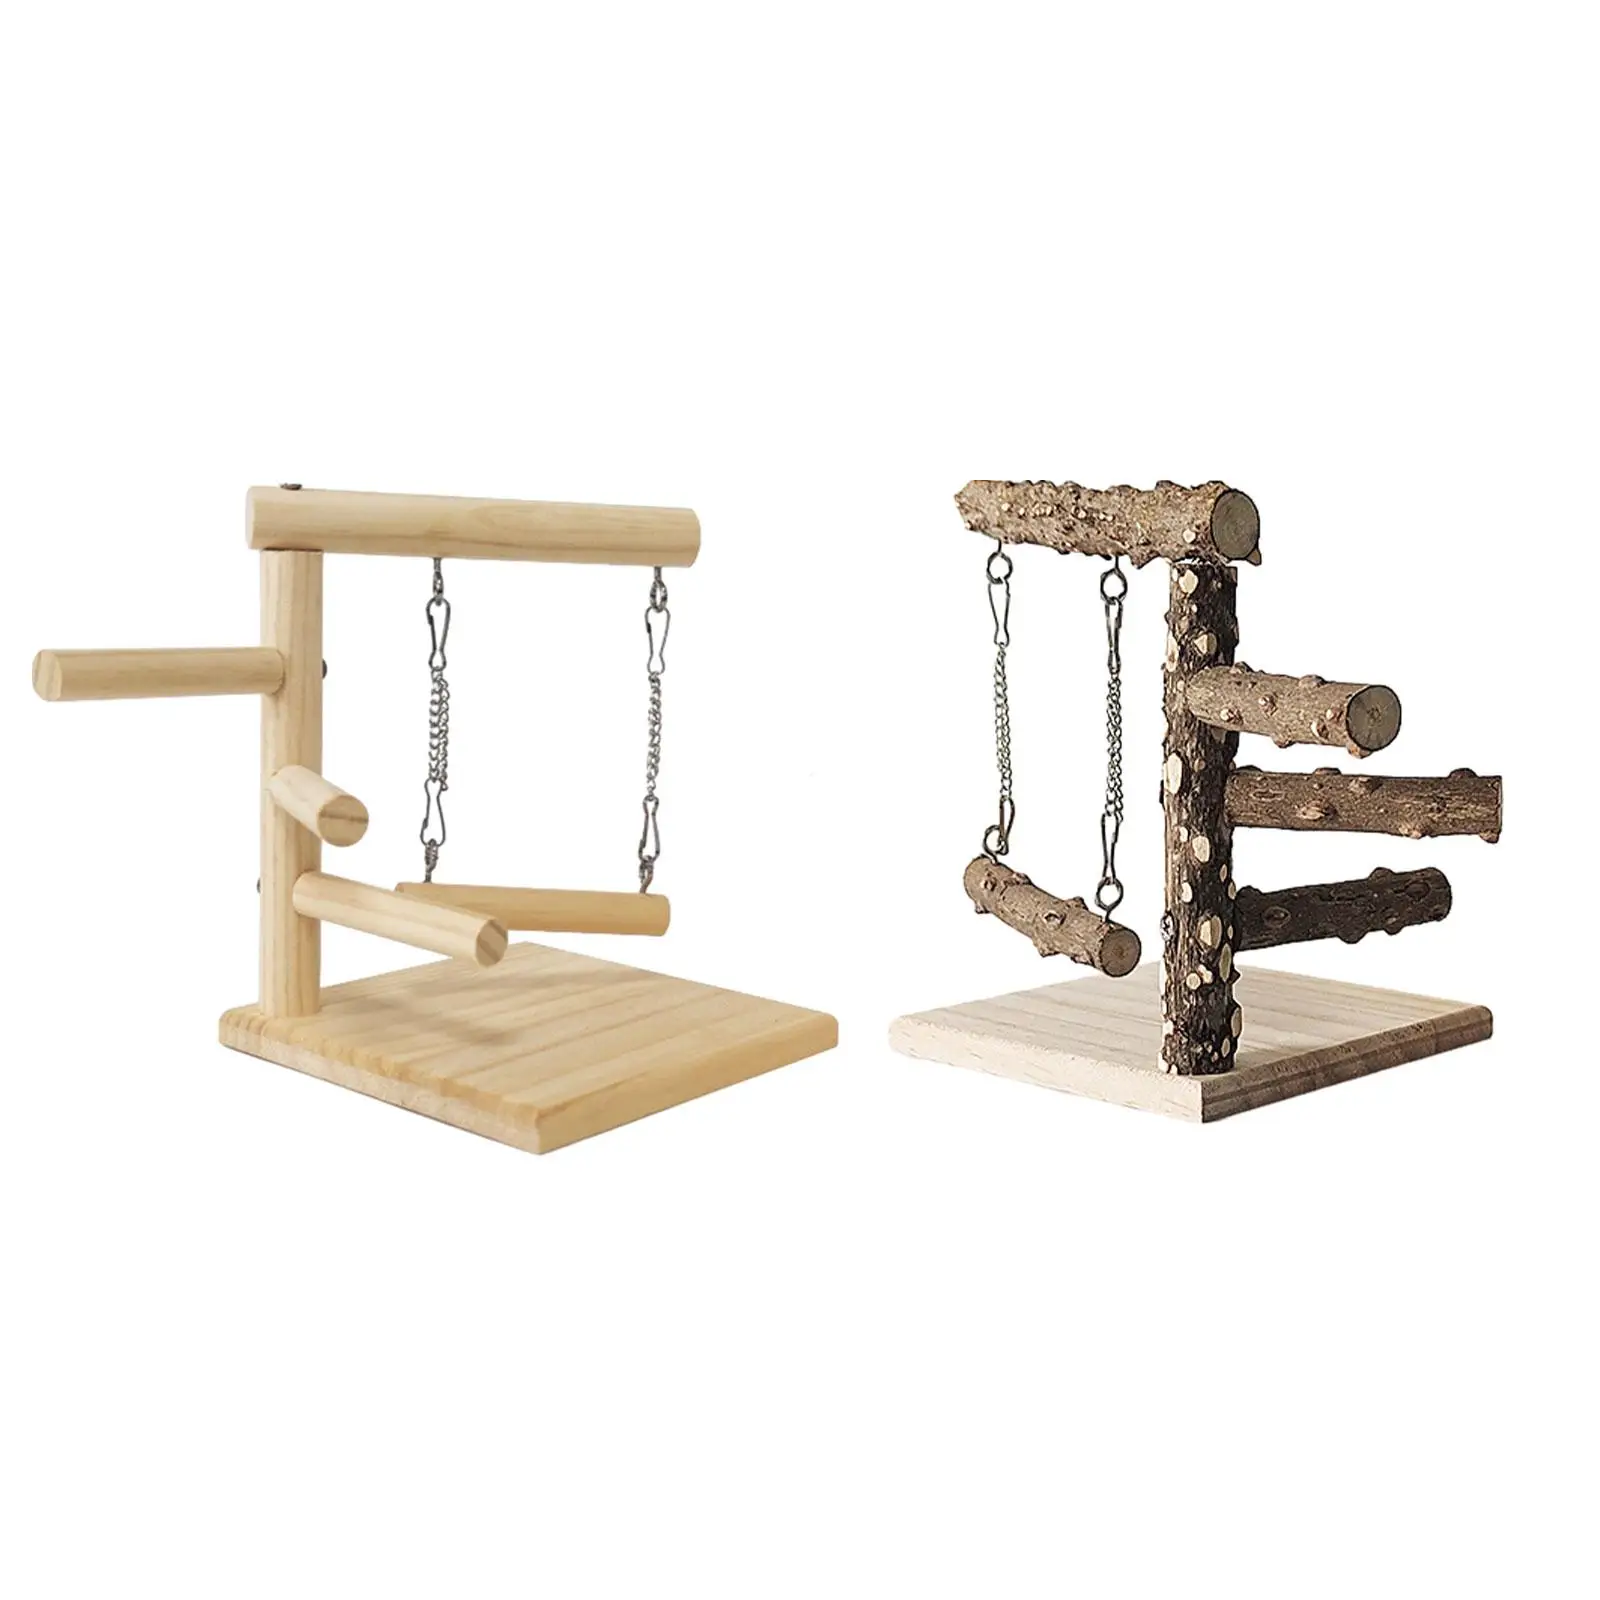 Bird Perch Stand Tabletop Exercise Gym Playground Bird Perches Standing Sticks for Canaries Parrots Cockatiels Parakeets